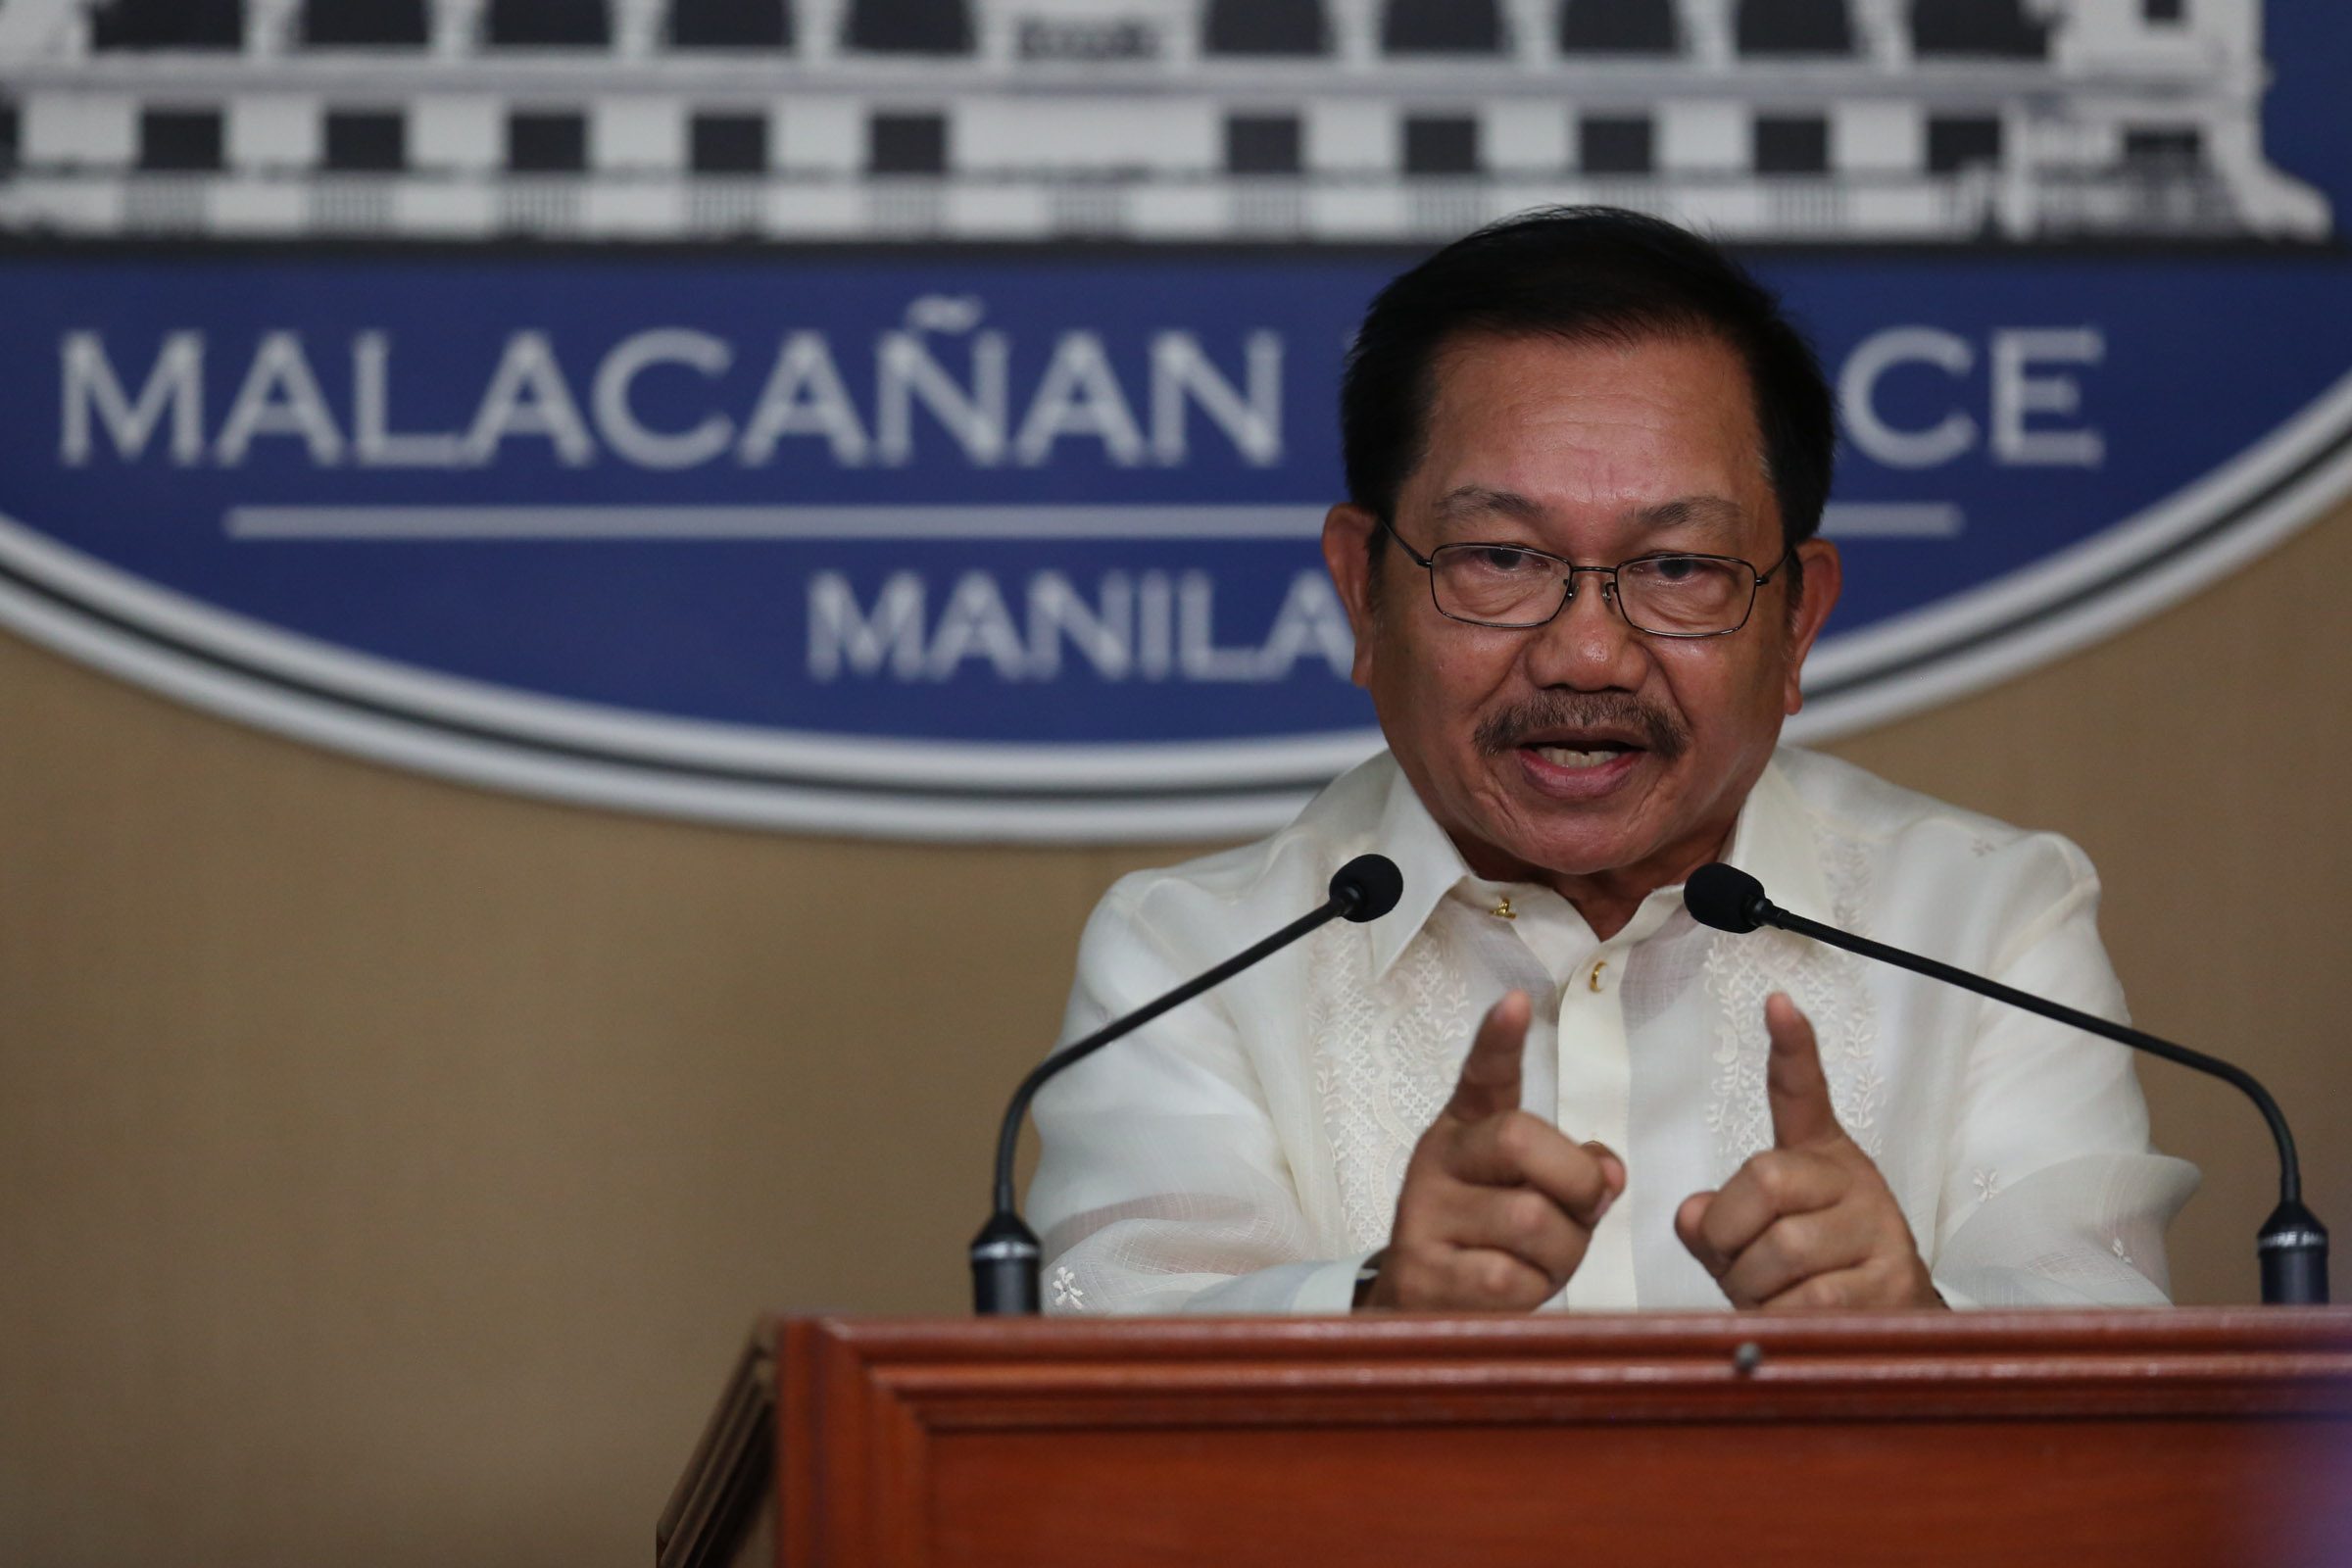 No agri in SONA? Piñol says Duterte’s style not to go into details